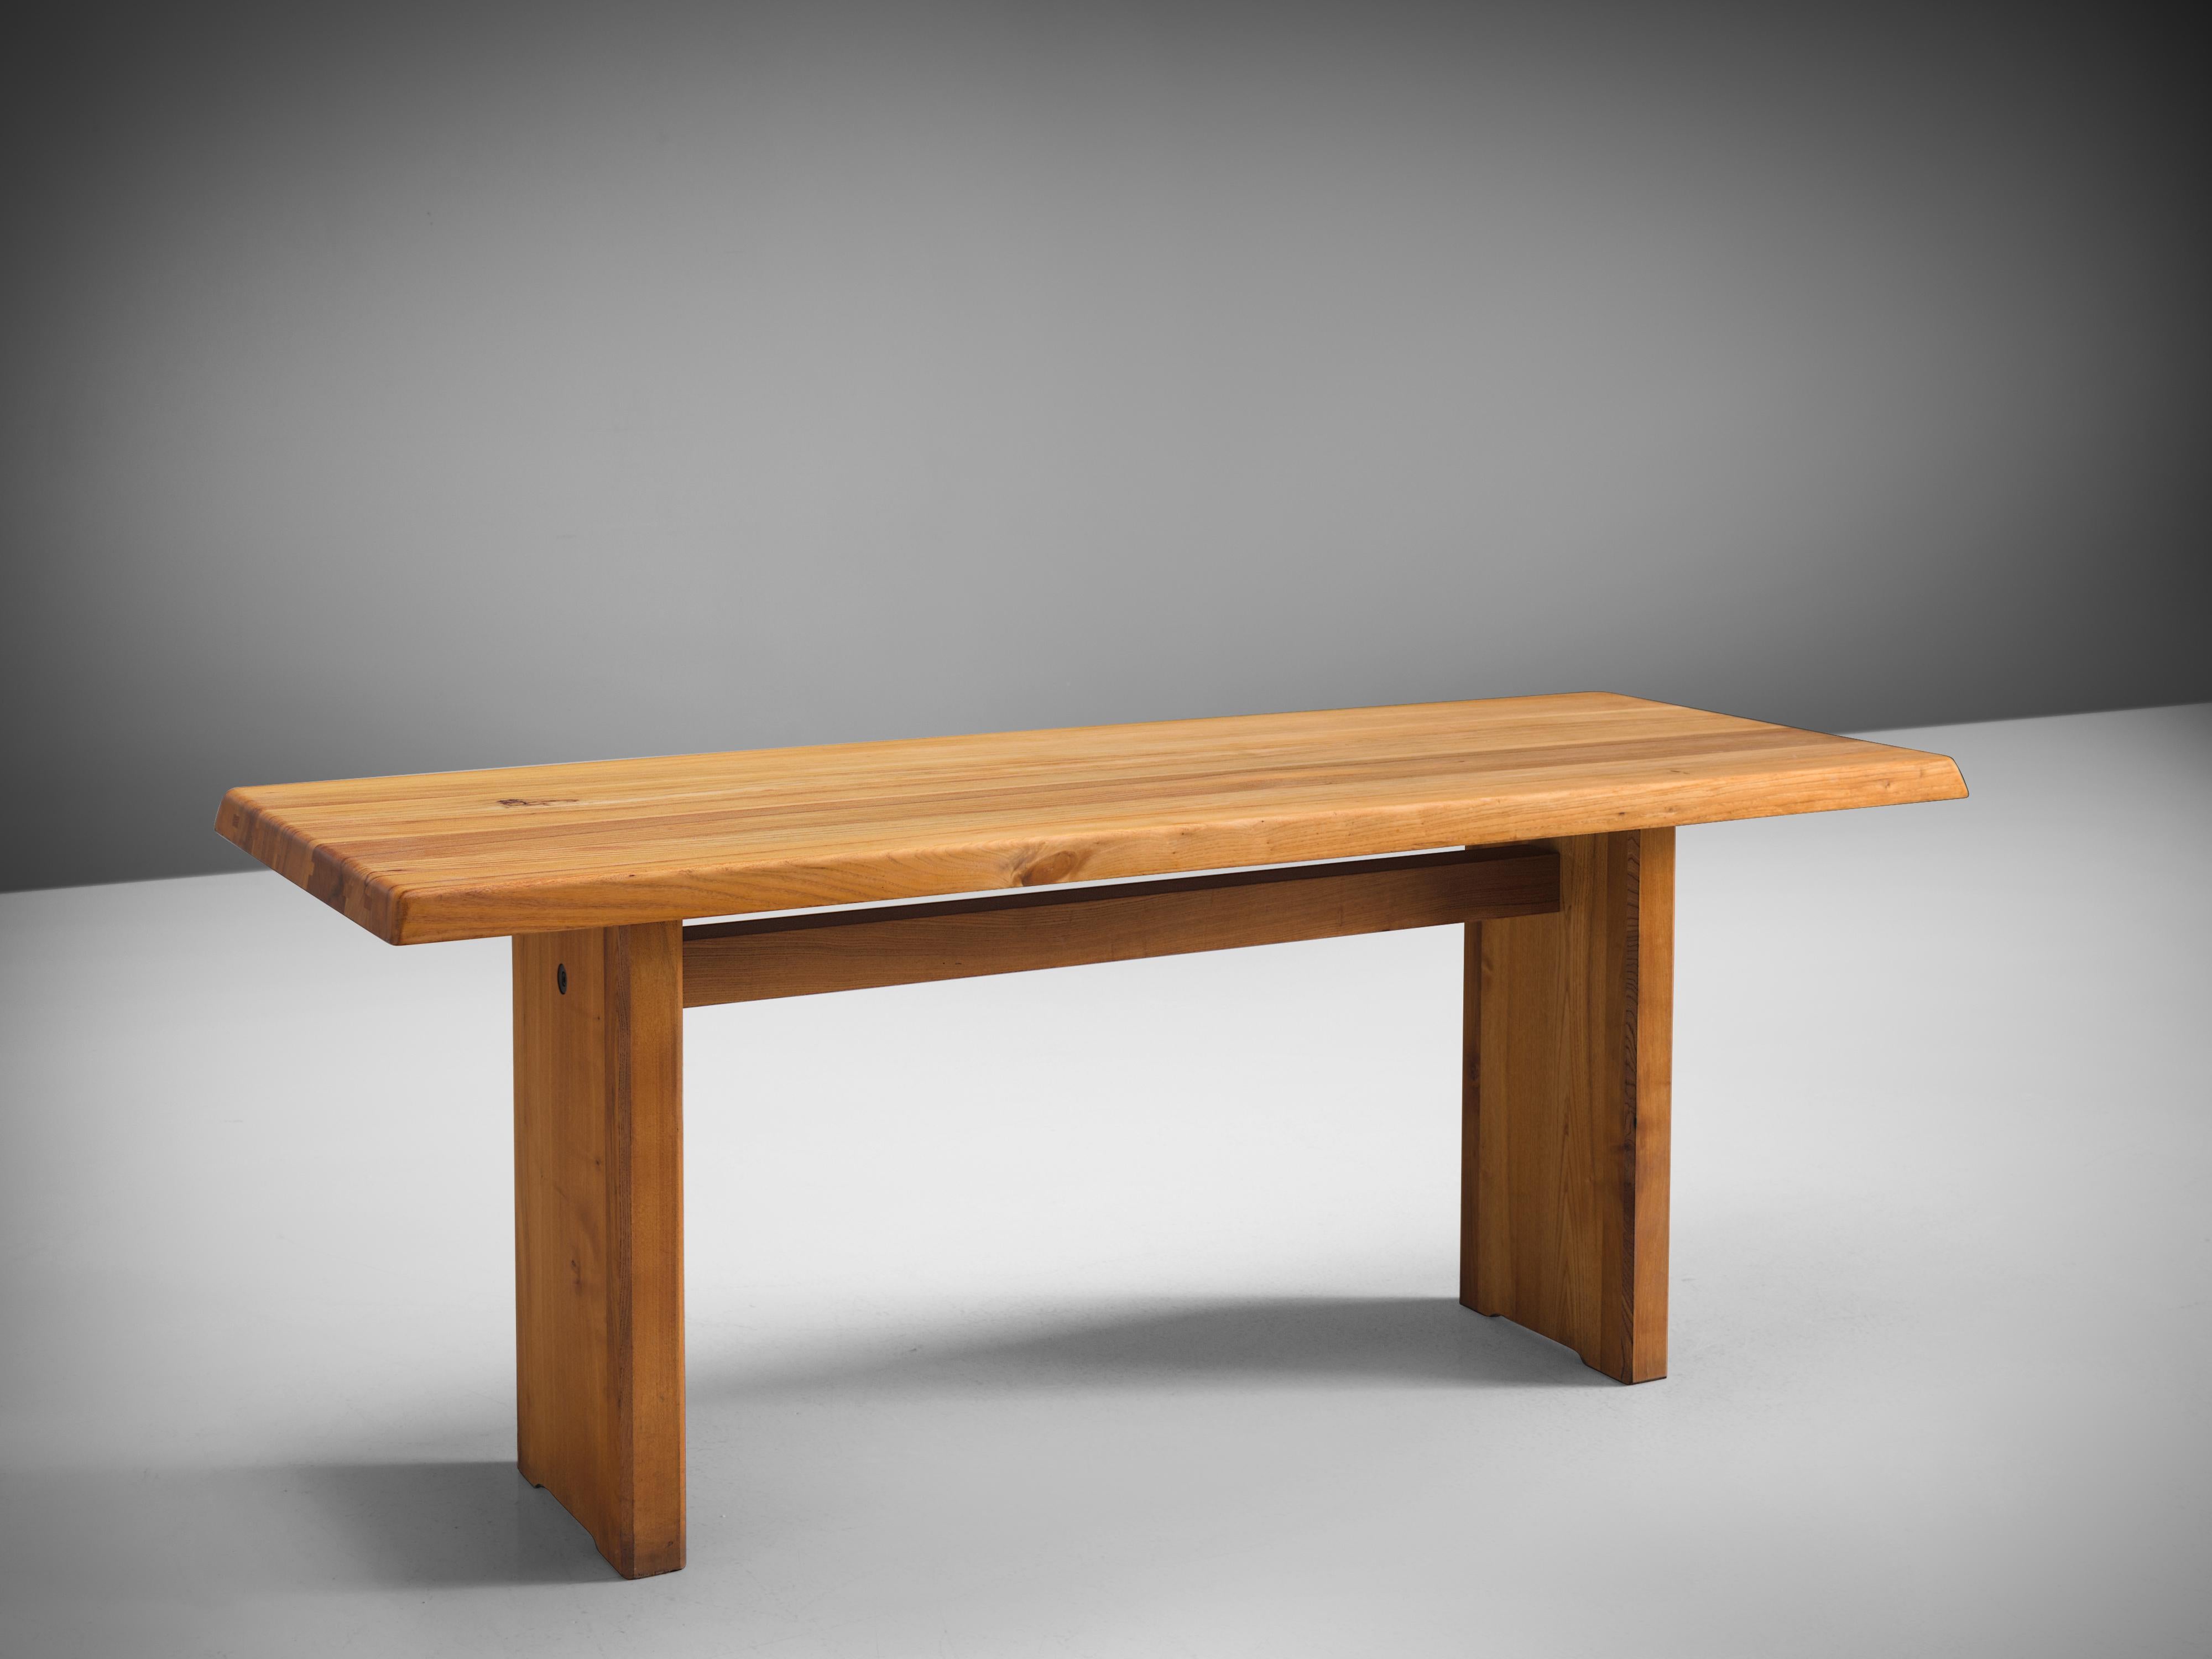 Pierre Chapo, dining table model 'T14B', elm, France, design 1964

This T14B dining table is one of the early editions designed by Pierre Chapo, known for his hallmark use of solid elmwood and a commitment to pure and clean design and construction